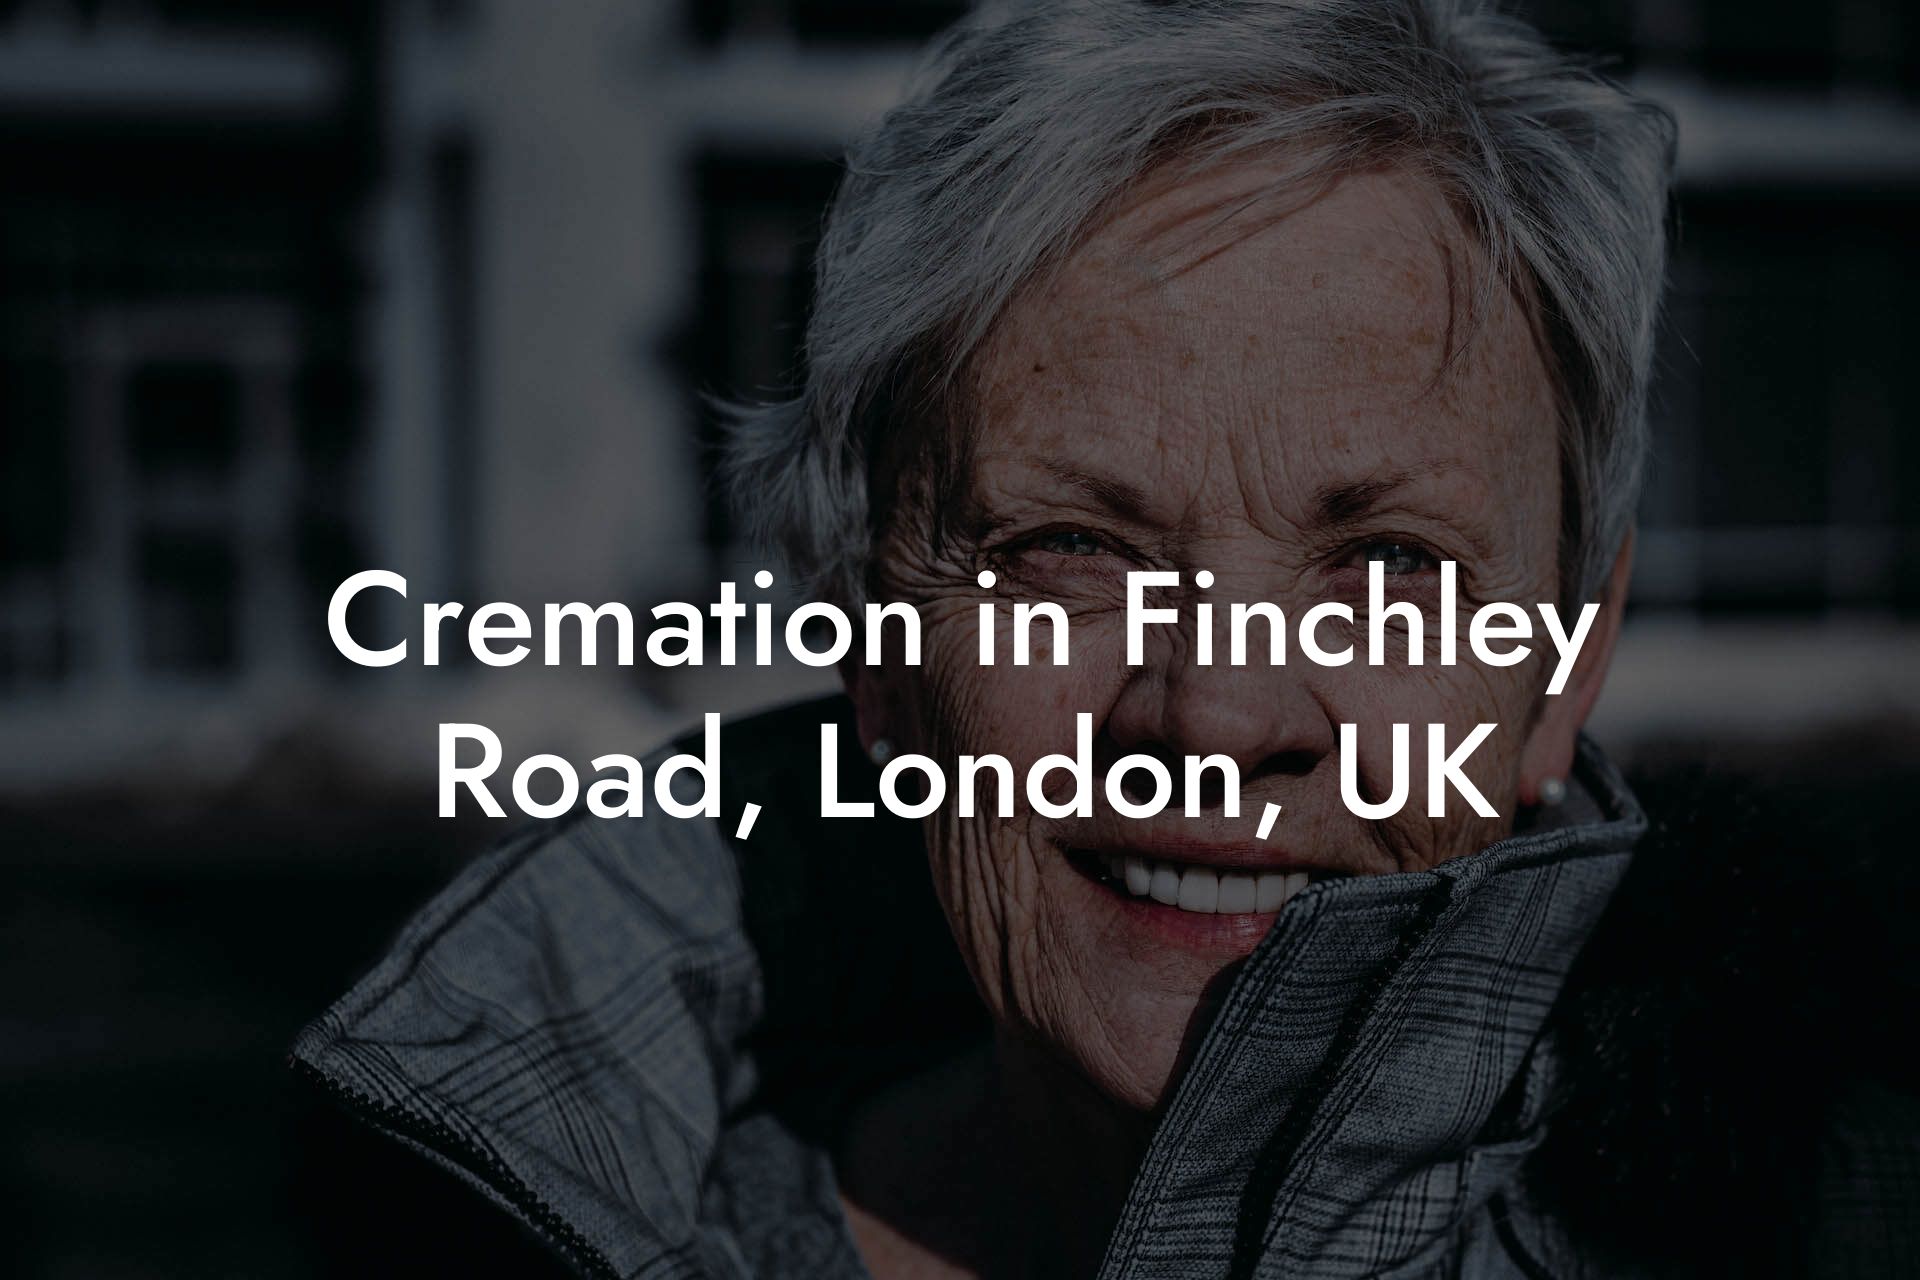 Cremation in Finchley Road, London, UK